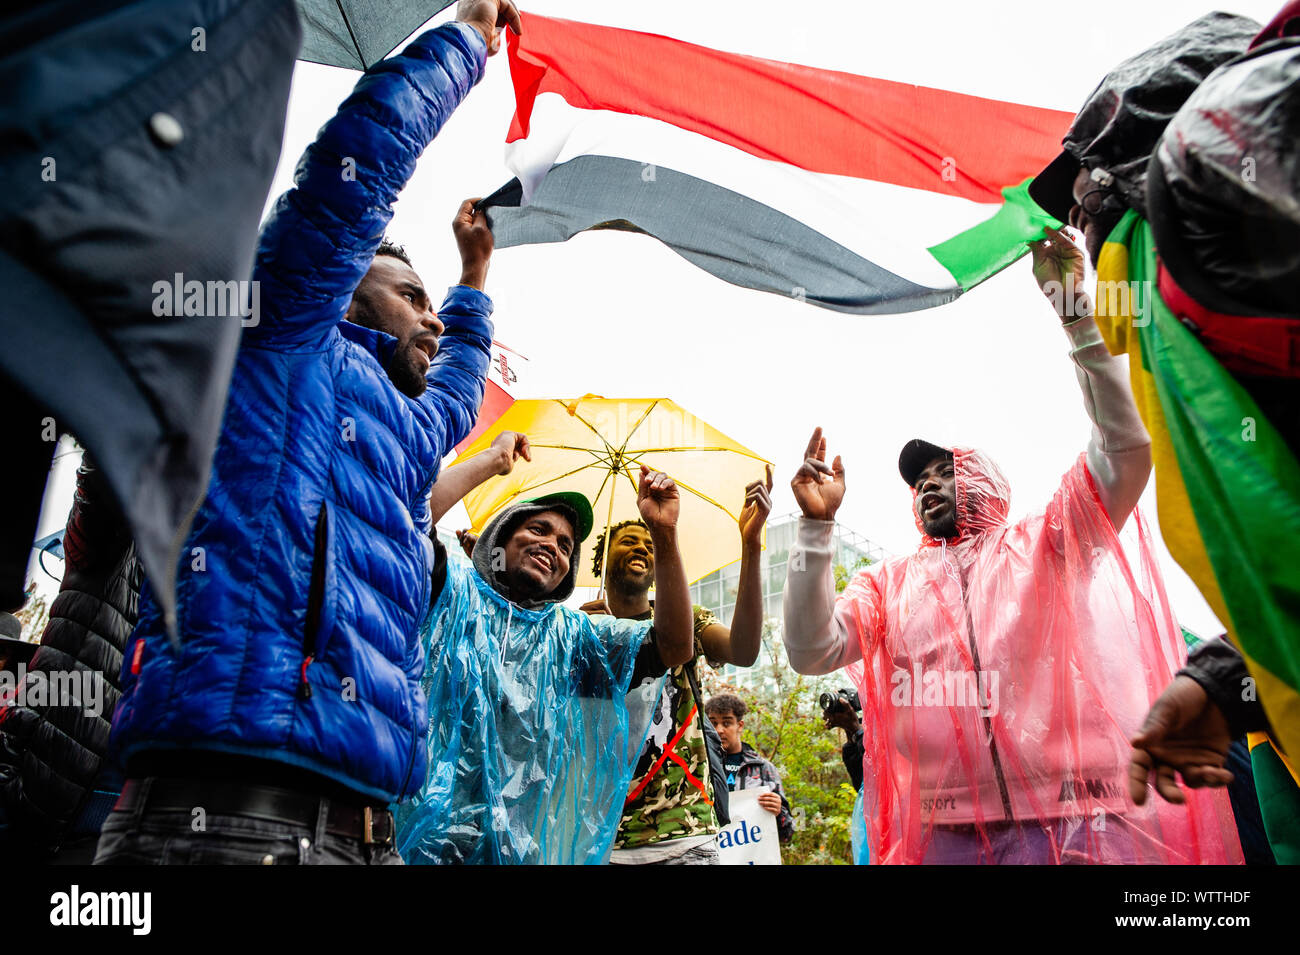 A group of Sudanese people dance below a Sudanese flag during the march.From September 6th to 11th, an international Sudanese march took place starting in London and ending in The Hague after stopping in France and Belgium. On September 11th, the march arrived in front of the International Criminal Court building, situated in The Hague. The march was held in solidarity with the Sudanese revolution and calls for the prosecution of military criminals in Sudan. The march was organized by the Sudanese Initiative Europe. Stock Photo